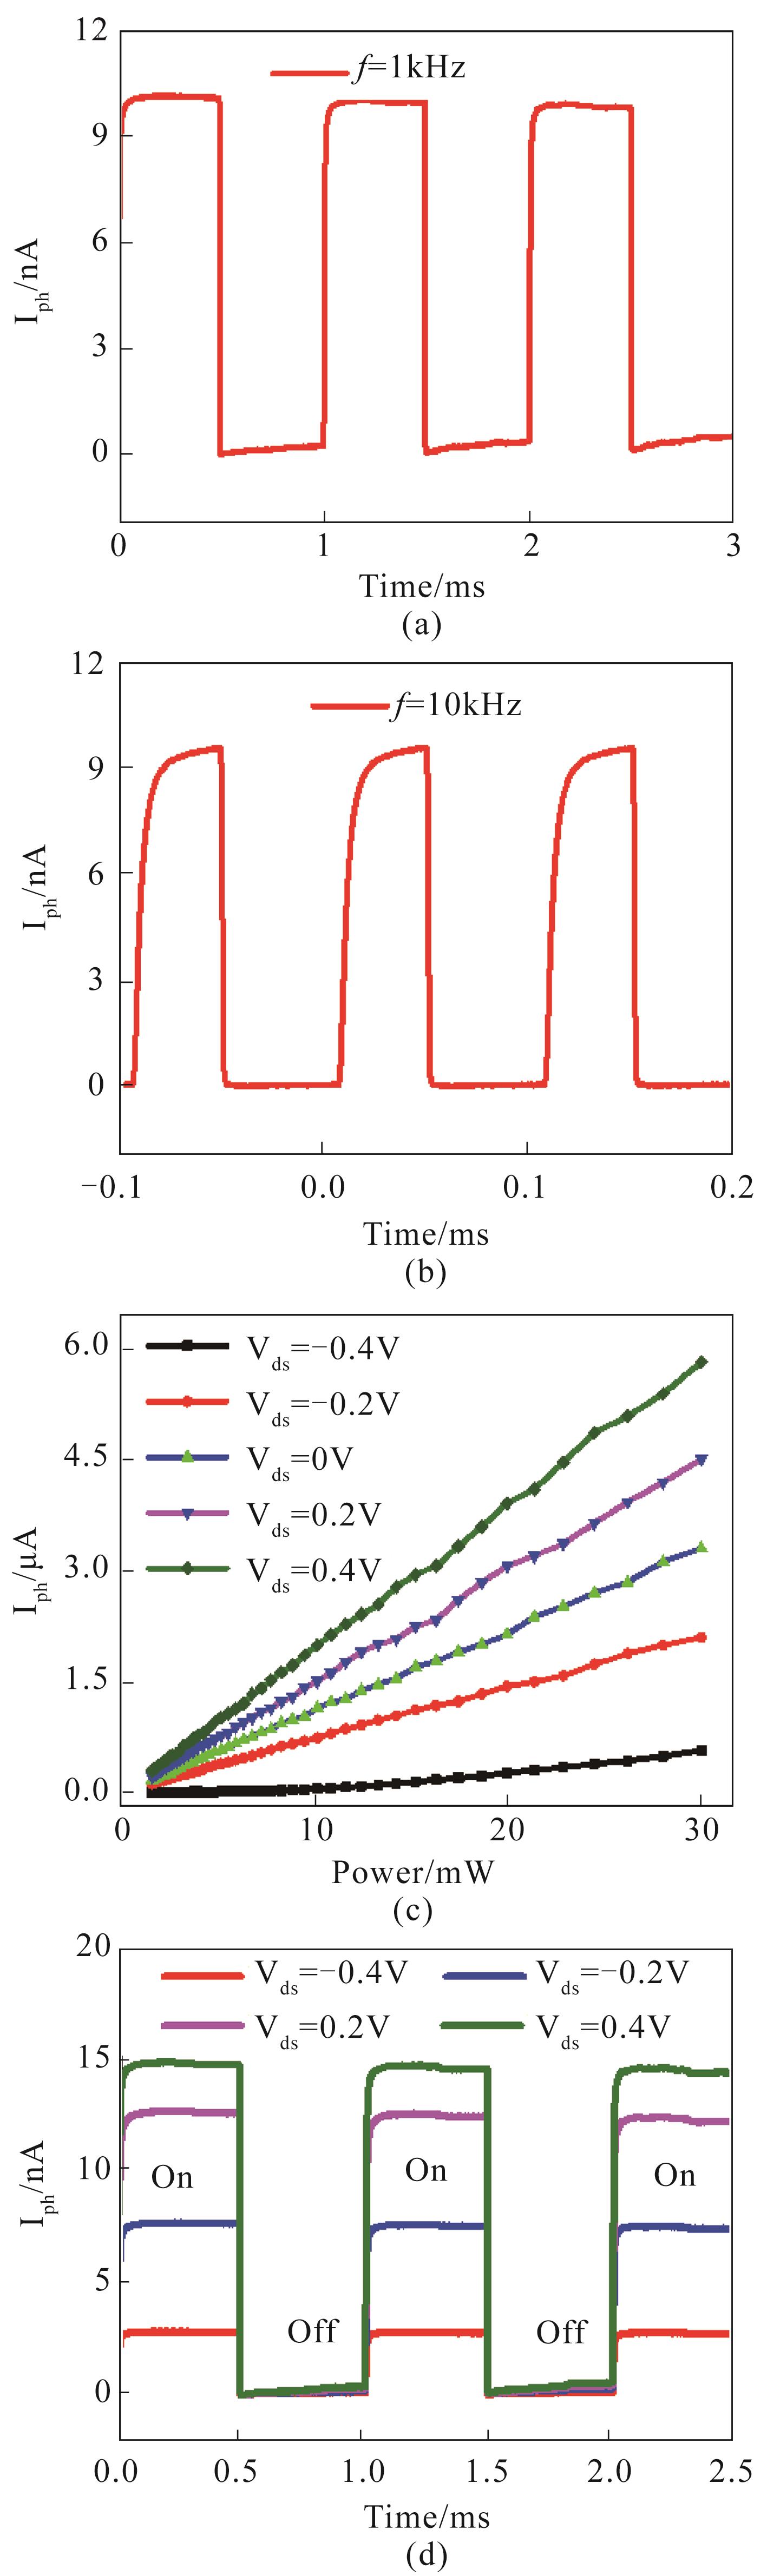 (a) (b) Time response of the photocurrent under radiation of 25 GHz at modulation frequencies of 1kHz and 10kHz with zero bias (c) Photocurrent response as a function of incident power at different bias voltages (d) Time response of the photocurrent at different bias voltage